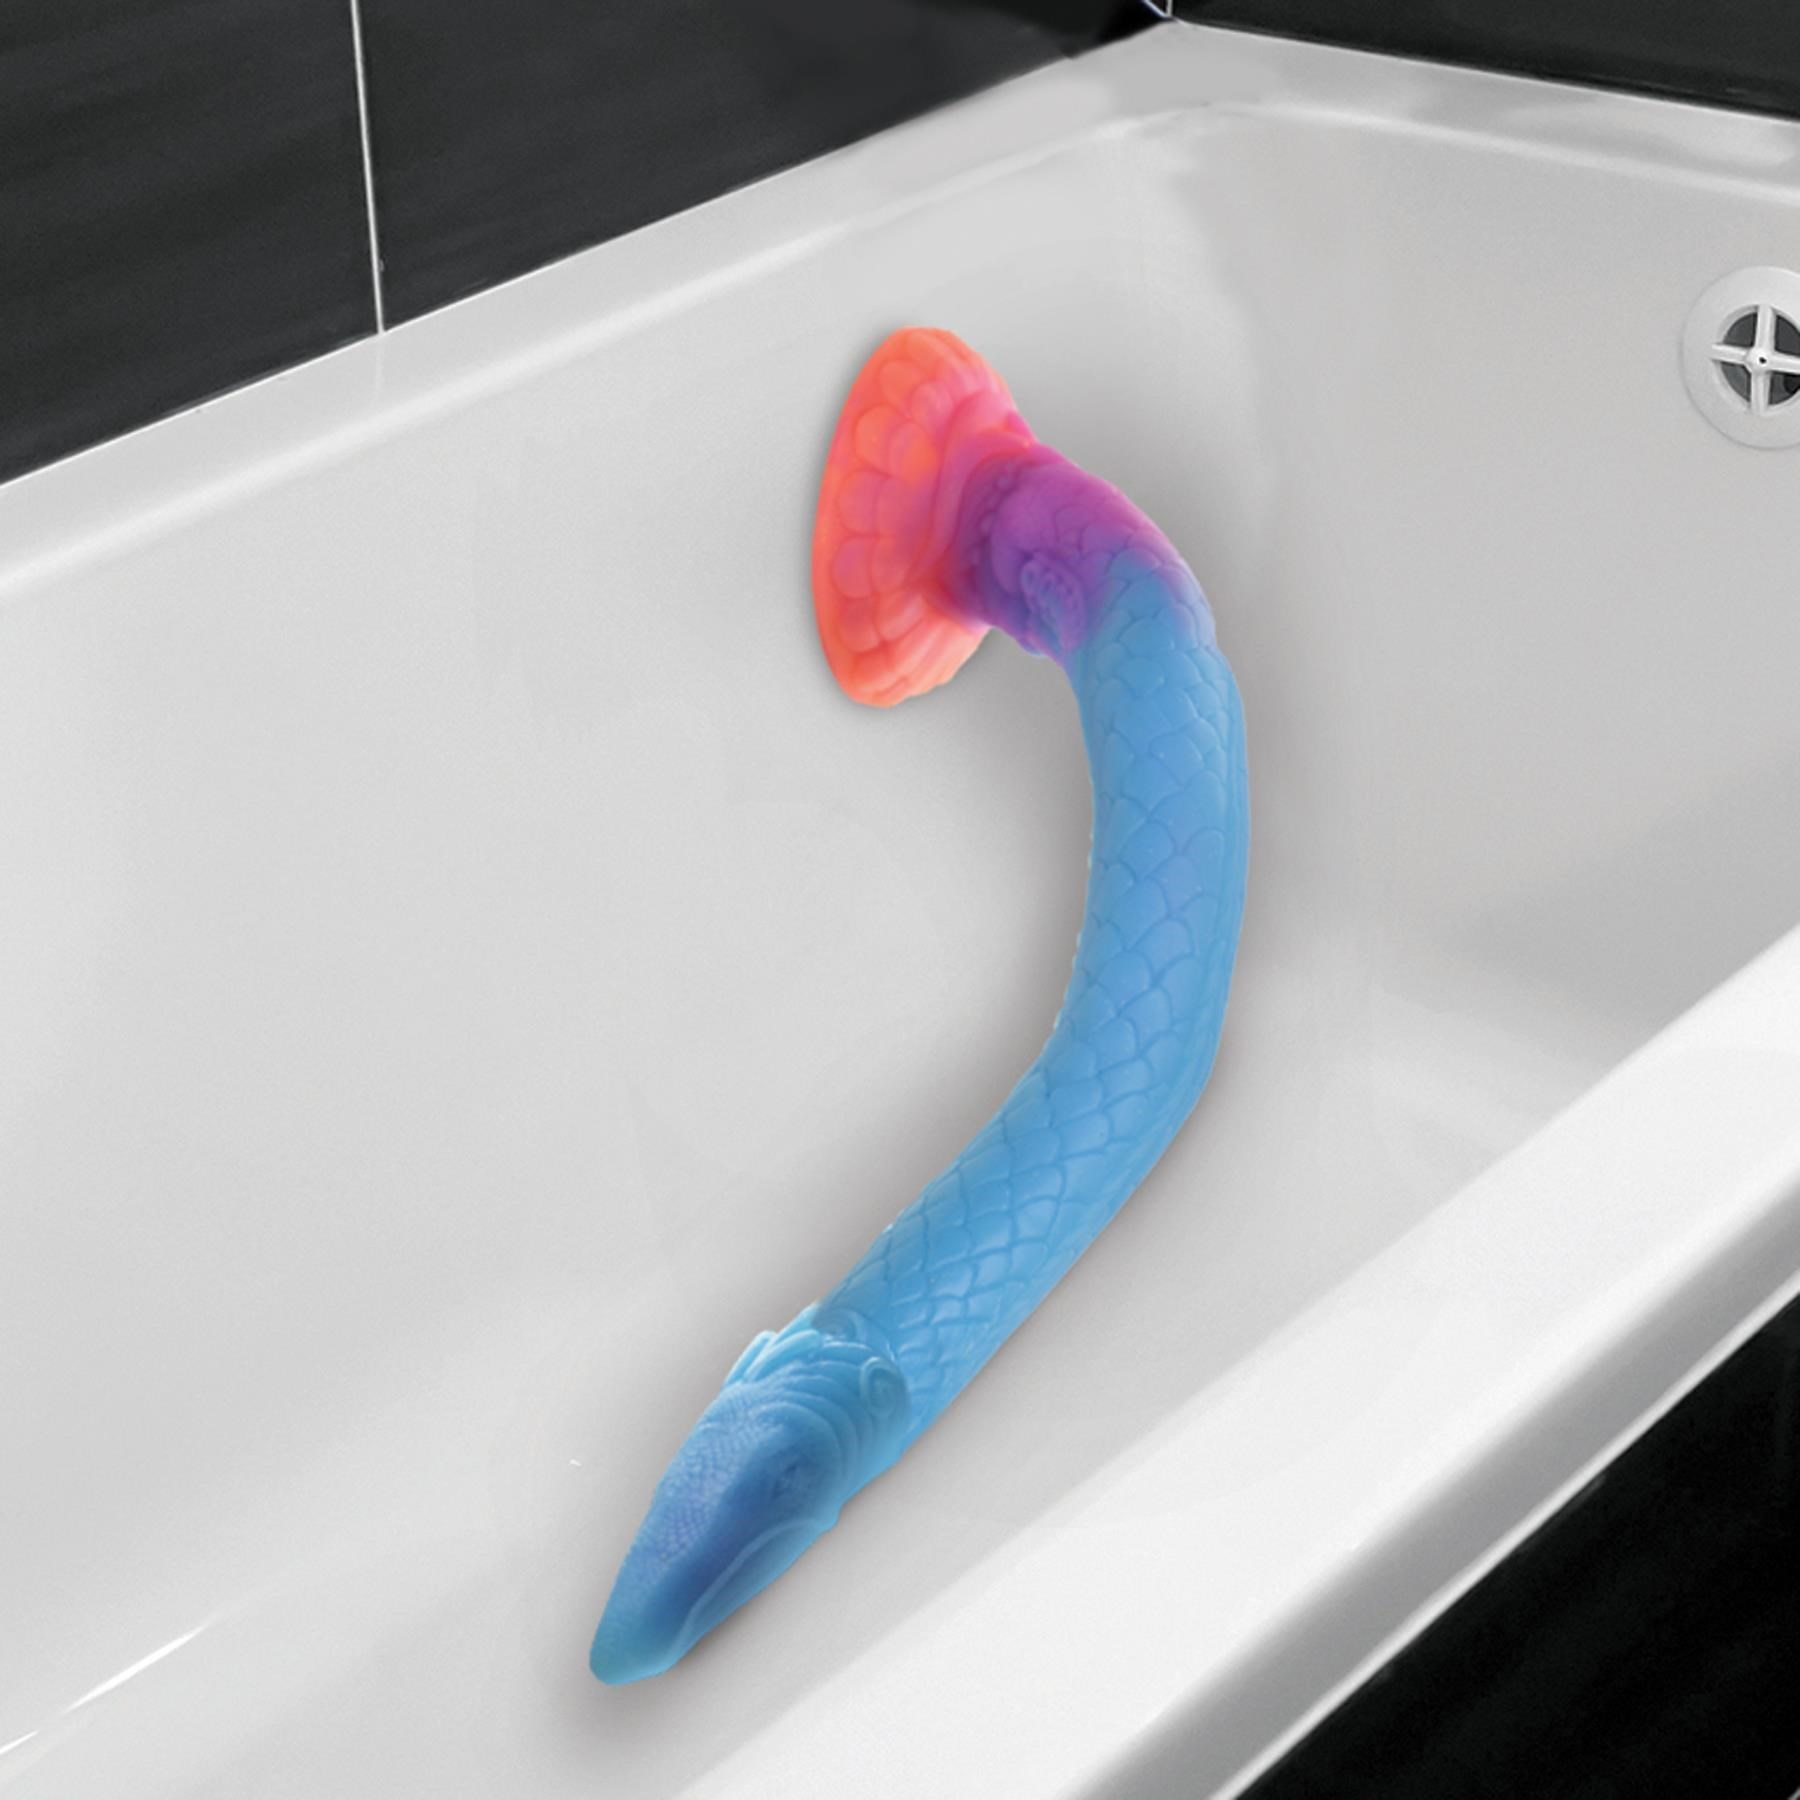 CreatureCocks Makara Snake Dildo - Product Shot in Tub to Show Suction